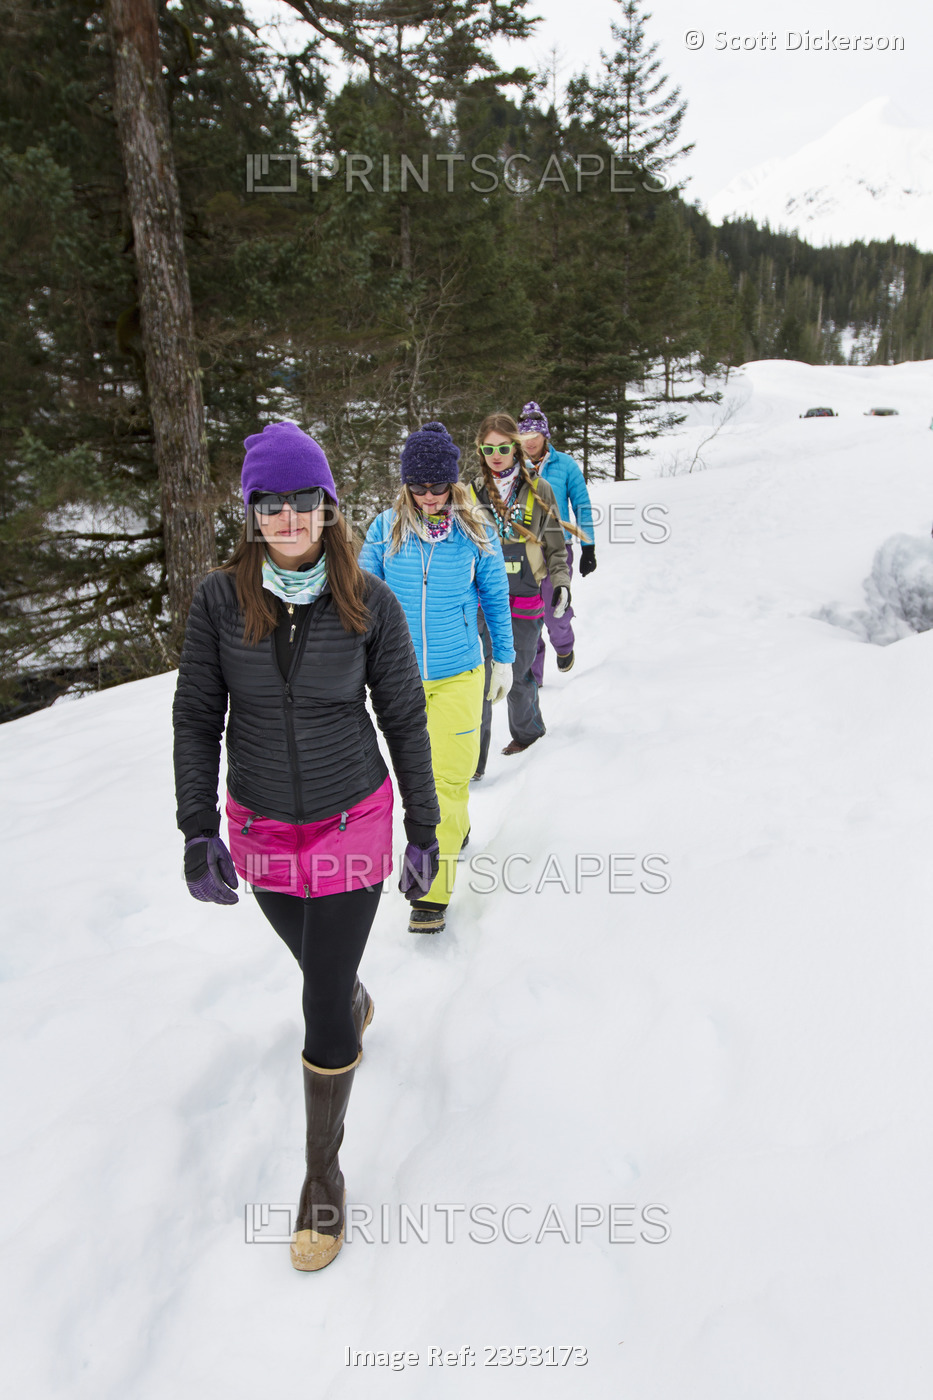 Women Hanging Out In Whittier While On A Backcountry Ski Trip By Snowmobile In ...